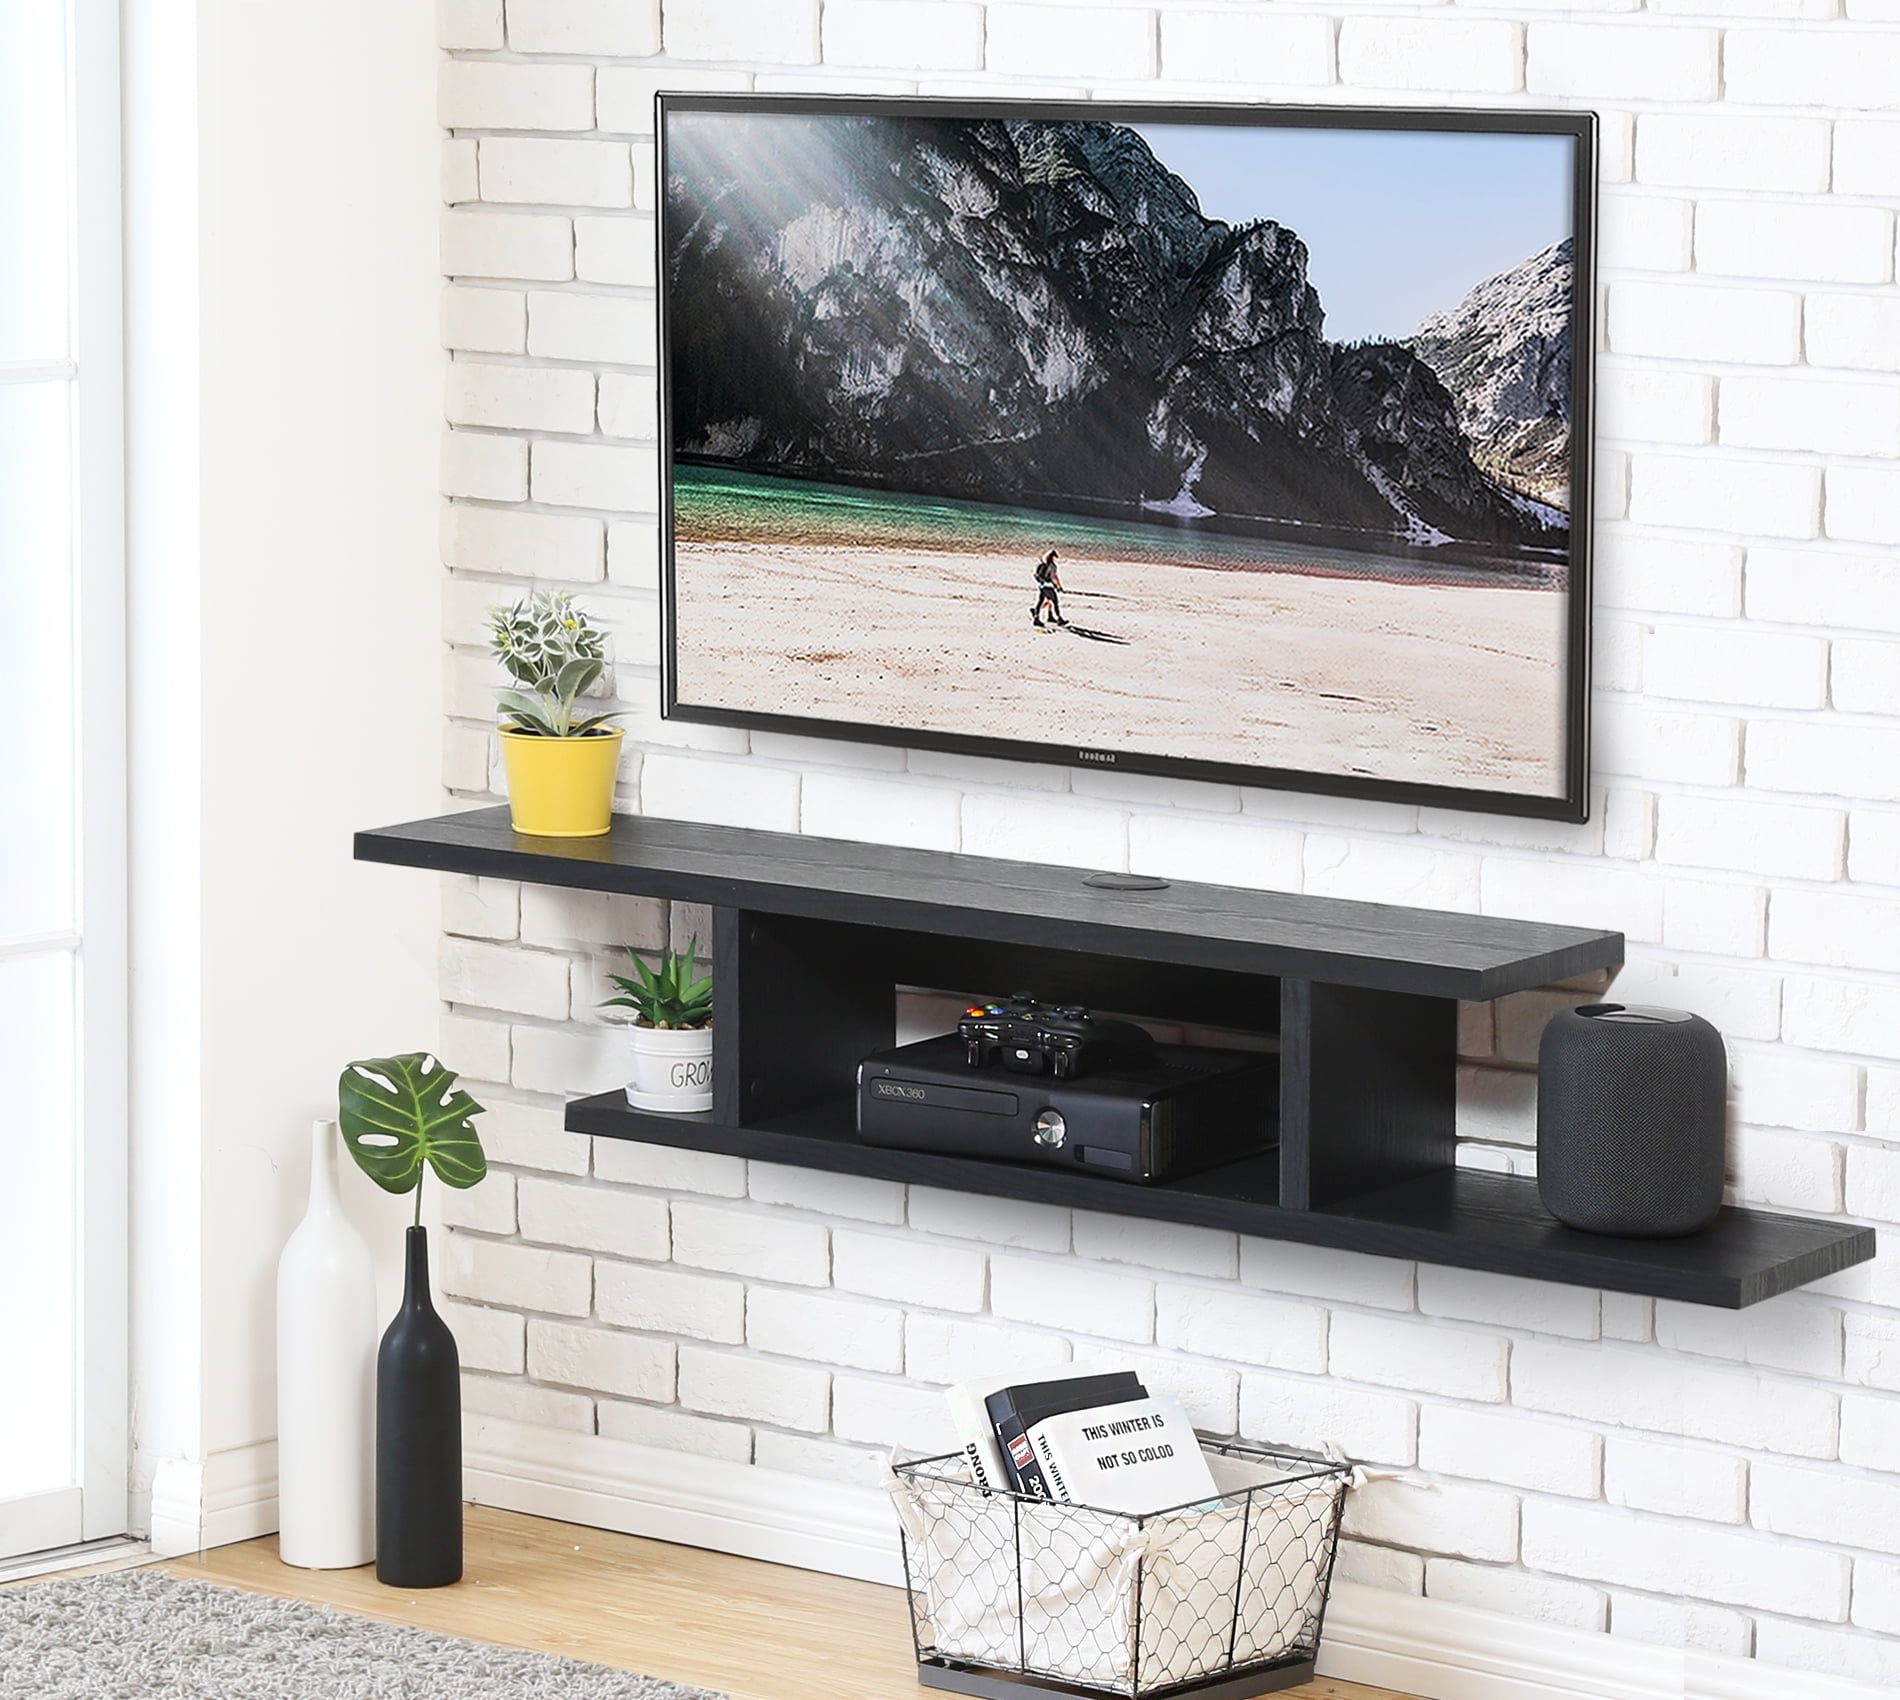 Fitueyes Floating Wall Mounted Tv Console Storage Shelf Modern Tv Stand With Regard To Wall Mounted Floating Tv Stands (View 10 of 20)